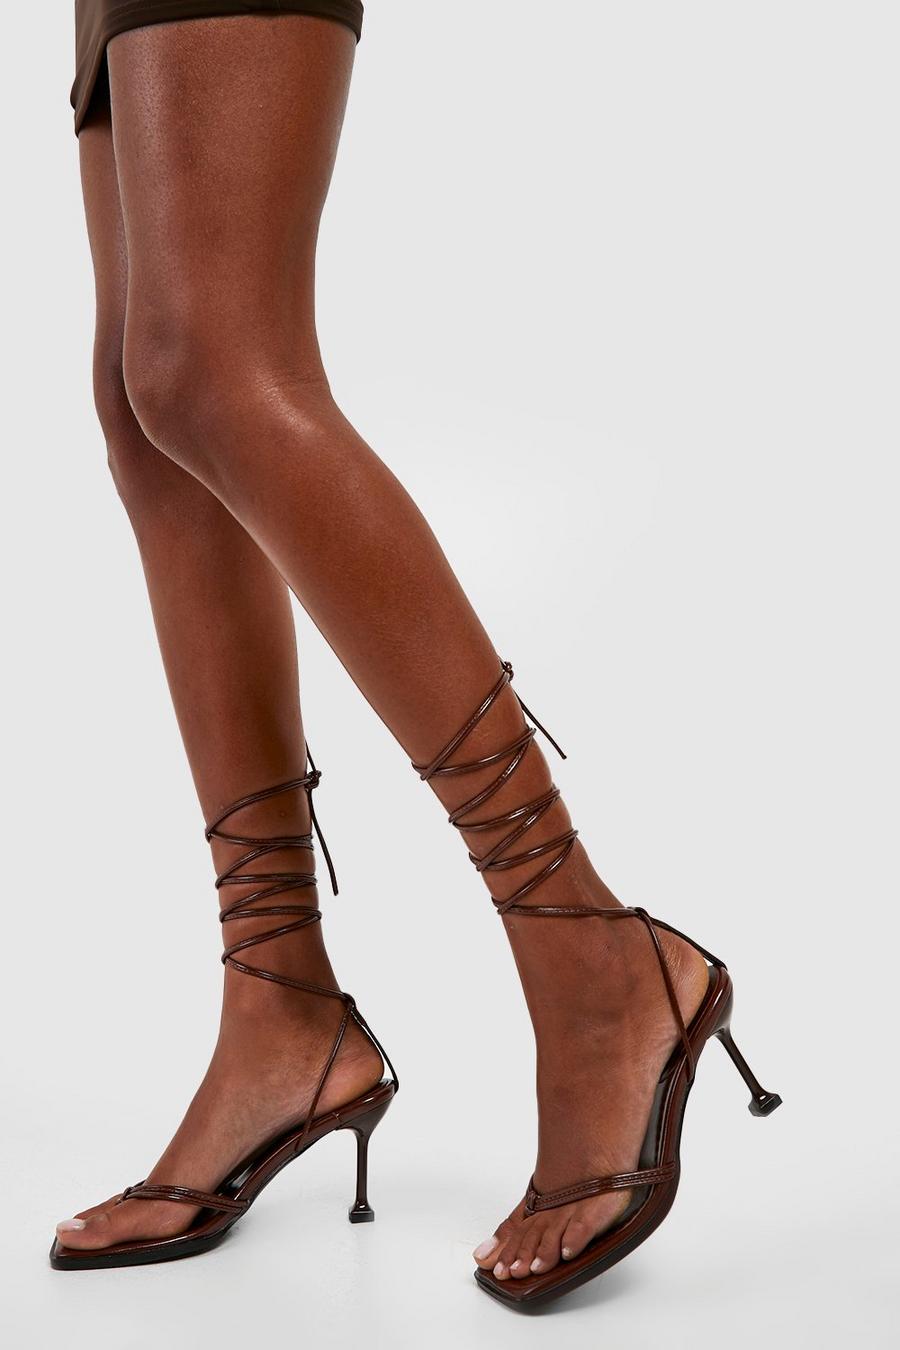 Chocolate brown Padded Insole Strappy Lace Up Heels